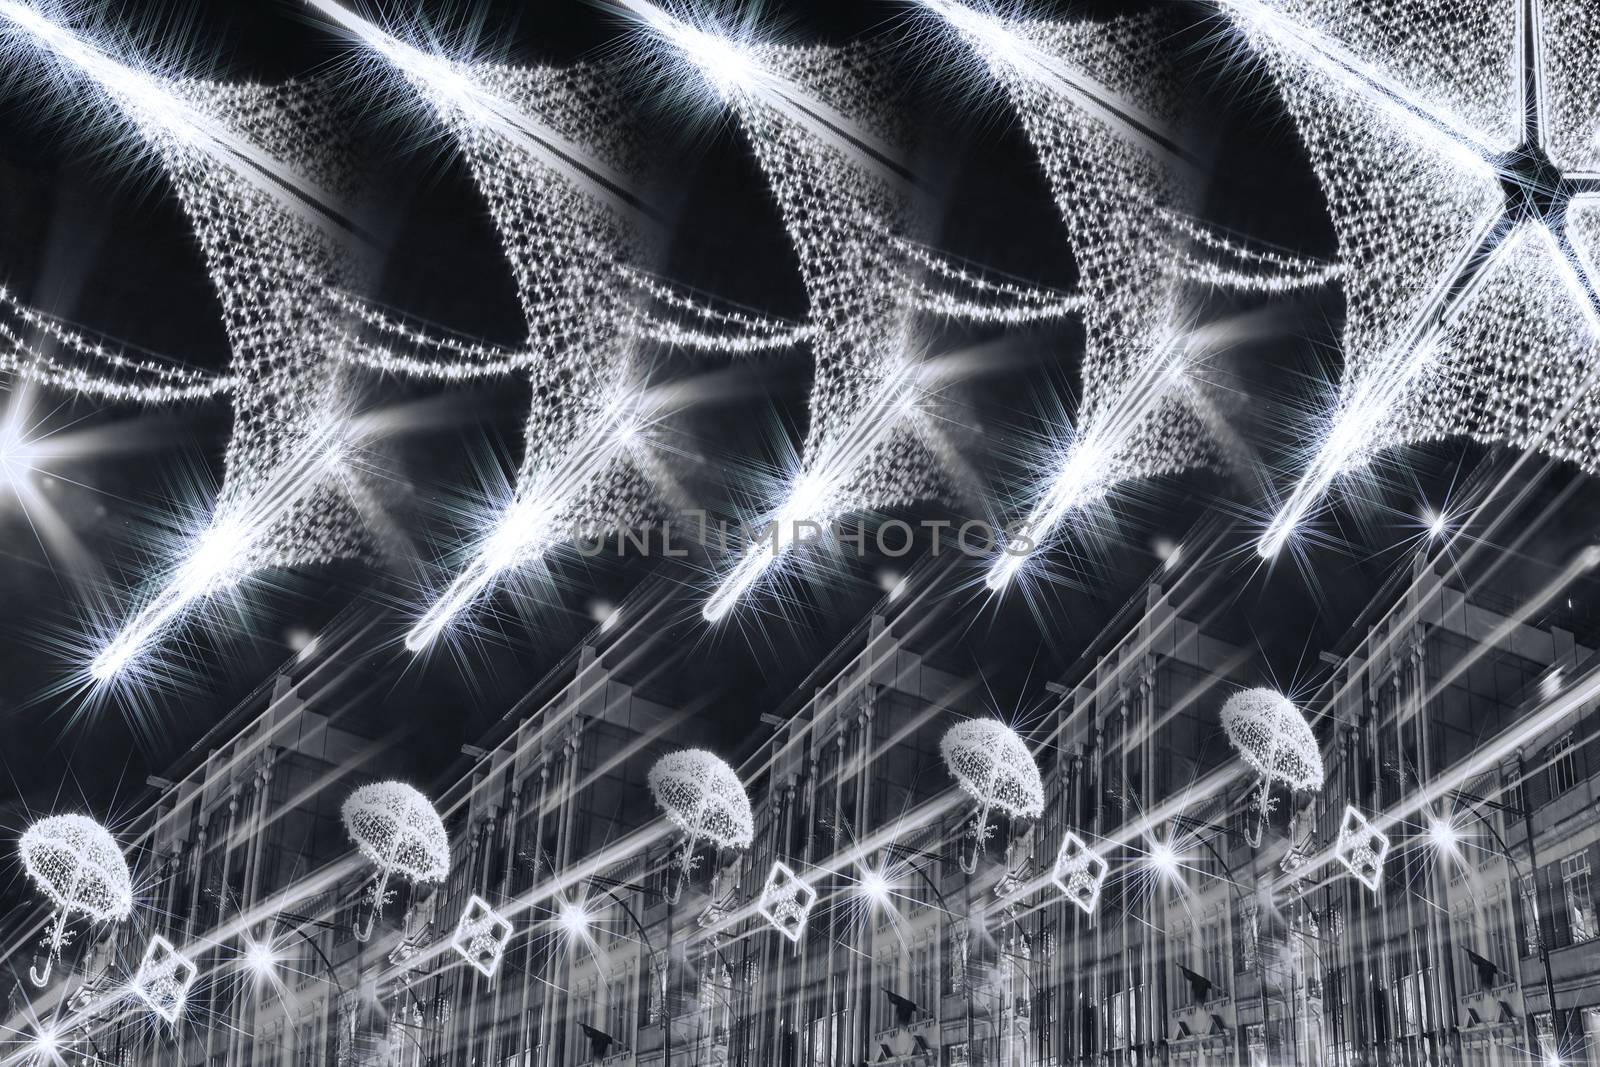 Abstract black and white image of  Christmas lights decorations in Oxford Street London England UK during the festive season in December stock photo